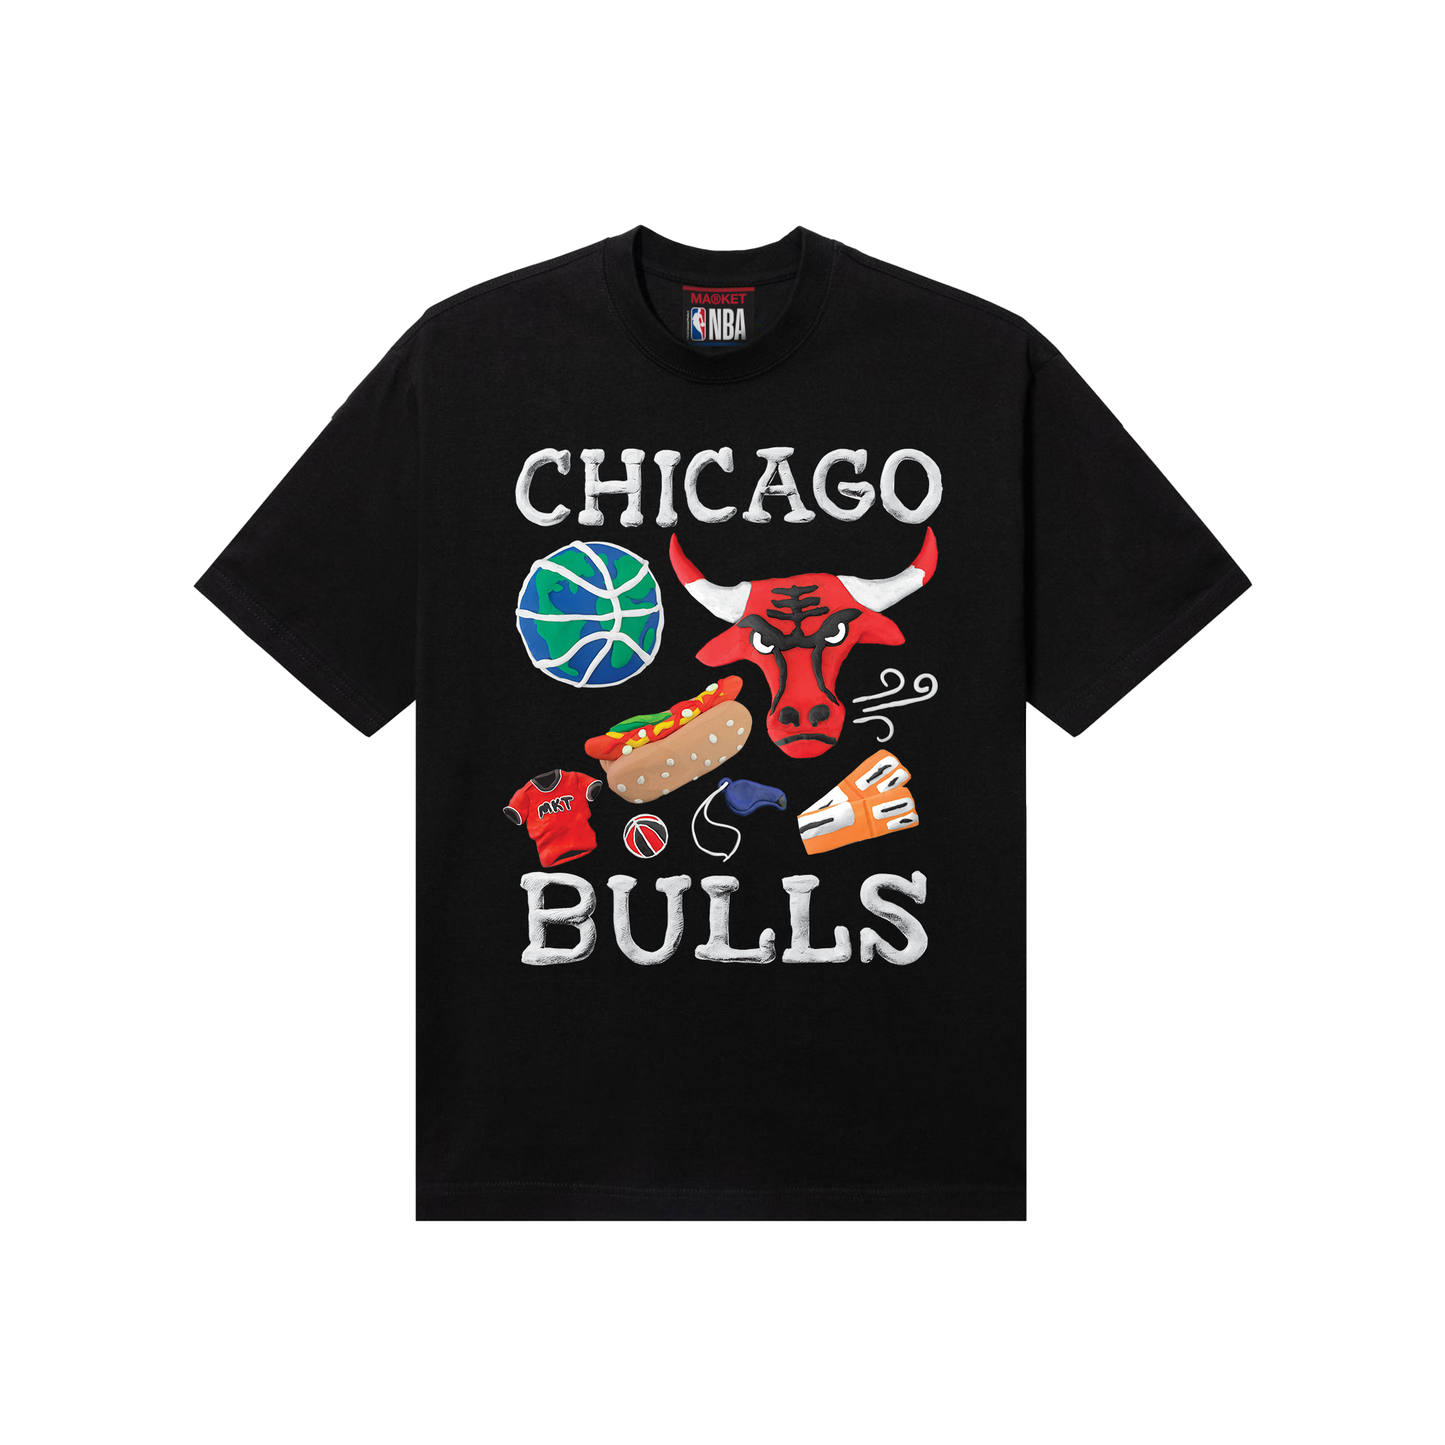 MARKET clothing brand MARKET BULLS T-SHIRT. Find more graphic tees, hats, hoodies and more at MarketStudios.com. Formally Chinatown Market.